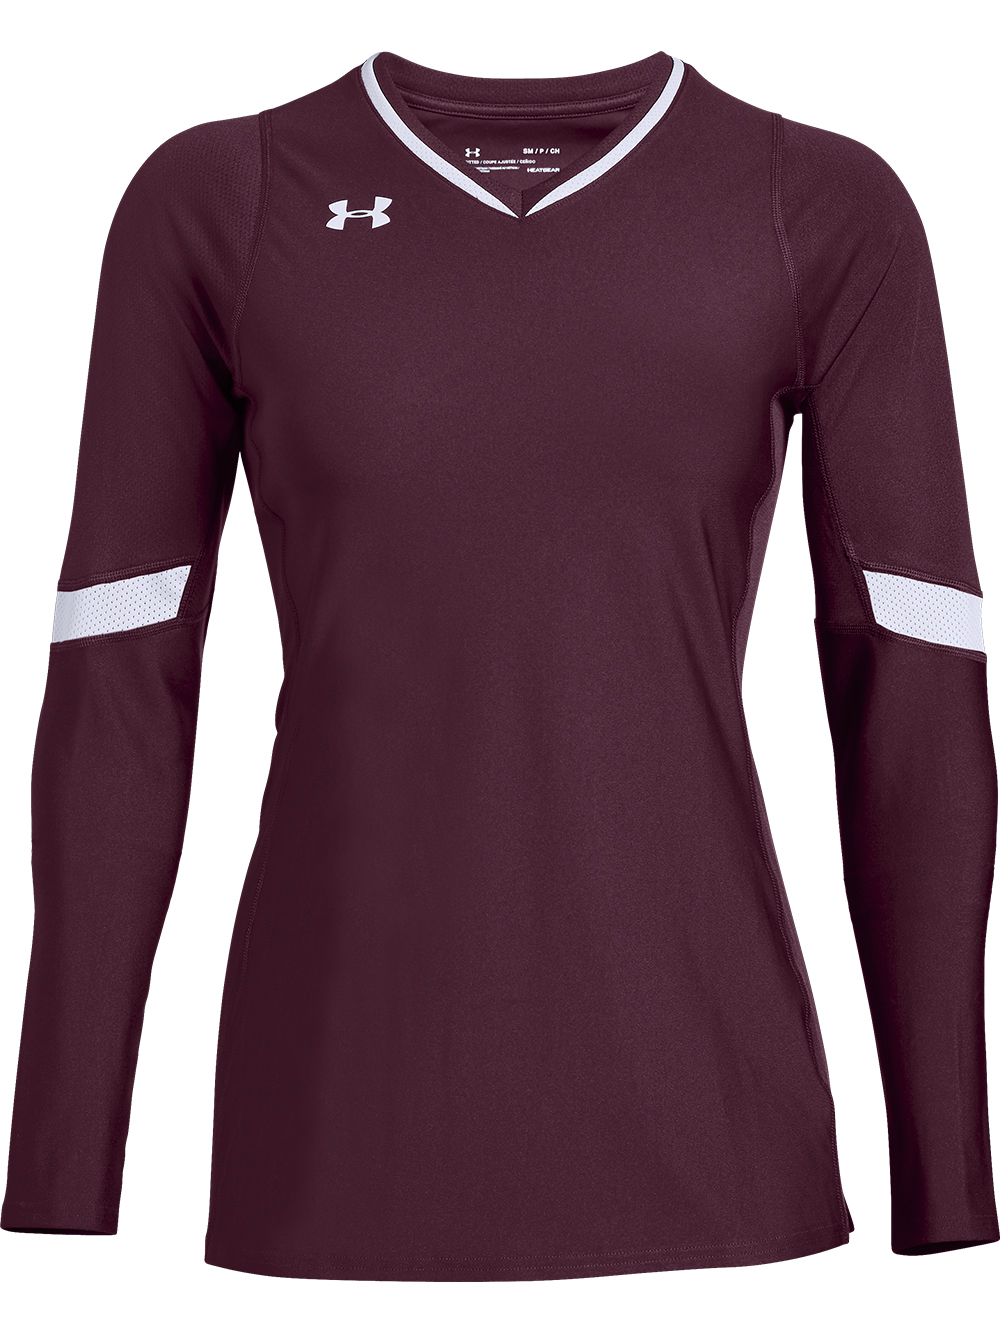 Under Armour Endless Power Long Sleeve Jersey - Columbia Blue/White